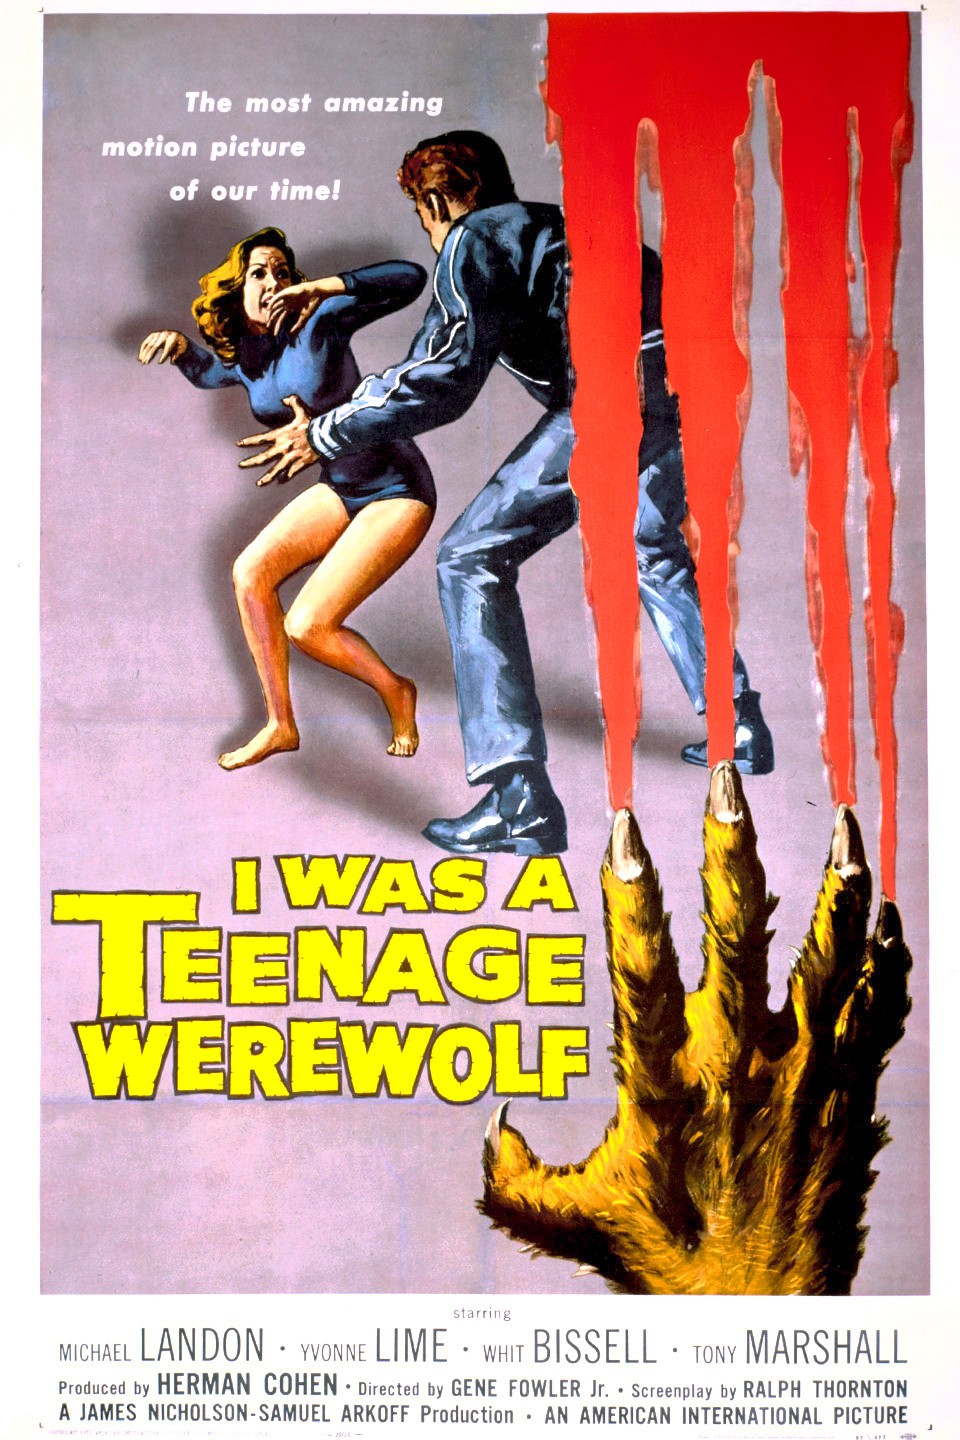 The Curse of the Werewolf - Rotten Tomatoes